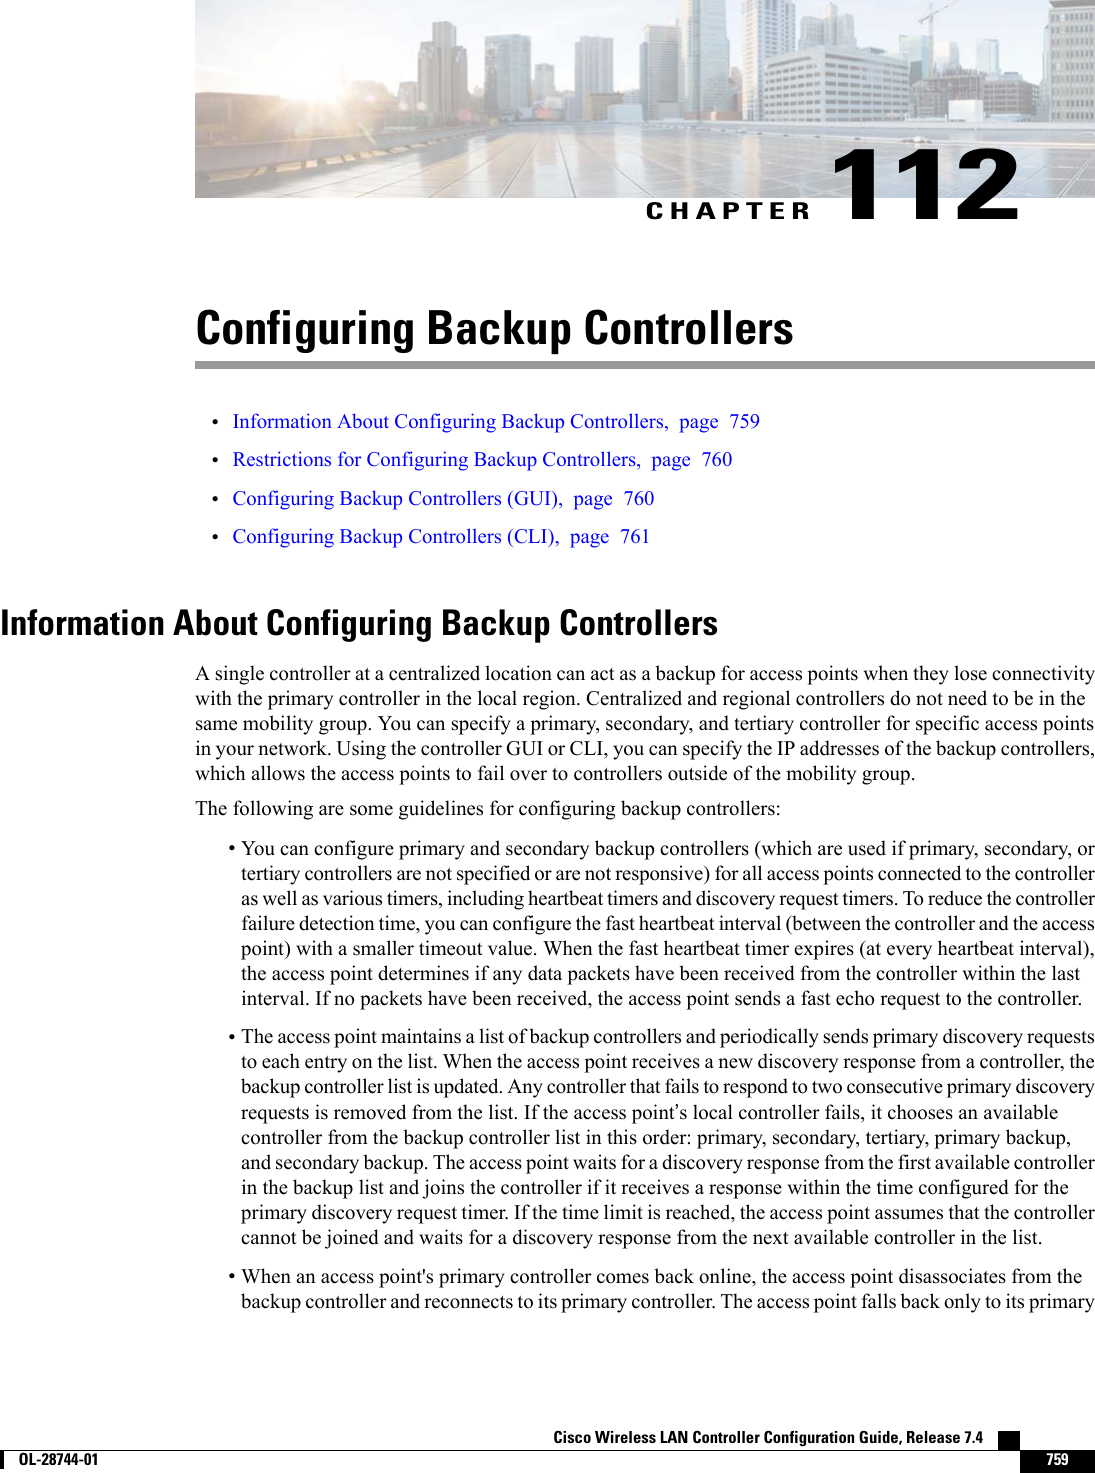 CHAPTER 112Configuring Backup Controllers•Information About Configuring Backup Controllers, page 759•Restrictions for Configuring Backup Controllers, page 760•Configuring Backup Controllers (GUI), page 760•Configuring Backup Controllers (CLI), page 761Information About Configuring Backup ControllersA single controller at a centralized location can act as a backup for access points when they lose connectivitywith the primary controller in the local region. Centralized and regional controllers do not need to be in thesame mobility group. You can specify a primary, secondary, and tertiary controller for specific access pointsin your network. Using the controller GUI or CLI, you can specify the IP addresses of the backup controllers,which allows the access points to fail over to controllers outside of the mobility group.The following are some guidelines for configuring backup controllers:•You can configure primary and secondary backup controllers (which are used if primary, secondary, ortertiary controllers are not specified or are not responsive) for all access points connected to the controlleras well as various timers, including heartbeat timers and discovery request timers. To reduce the controllerfailure detection time, you can configure the fast heartbeat interval (between the controller and the accesspoint) with a smaller timeout value. When the fast heartbeat timer expires (at every heartbeat interval),the access point determines if any data packets have been received from the controller within the lastinterval. If no packets have been received, the access point sends a fast echo request to the controller.•The access point maintains a list of backup controllers and periodically sends primary discovery requeststo each entry on the list. When the access point receives a new discovery response from a controller, thebackup controller list is updated. Any controller that fails to respond to two consecutive primary discoveryrequests is removed from the list. If the access point’s local controller fails, it chooses an availablecontroller from the backup controller list in this order: primary, secondary, tertiary, primary backup,and secondary backup. The access point waits for a discovery response from the first available controllerin the backup list and joins the controller if it receives a response within the time configured for theprimary discovery request timer. If the time limit is reached, the access point assumes that the controllercannot be joined and waits for a discovery response from the next available controller in the list.•When an access point&apos;s primary controller comes back online, the access point disassociates from thebackup controller and reconnects to its primary controller. The access point falls back only to its primaryCisco Wireless LAN Controller Configuration Guide, Release 7.4        OL-28744-01 759